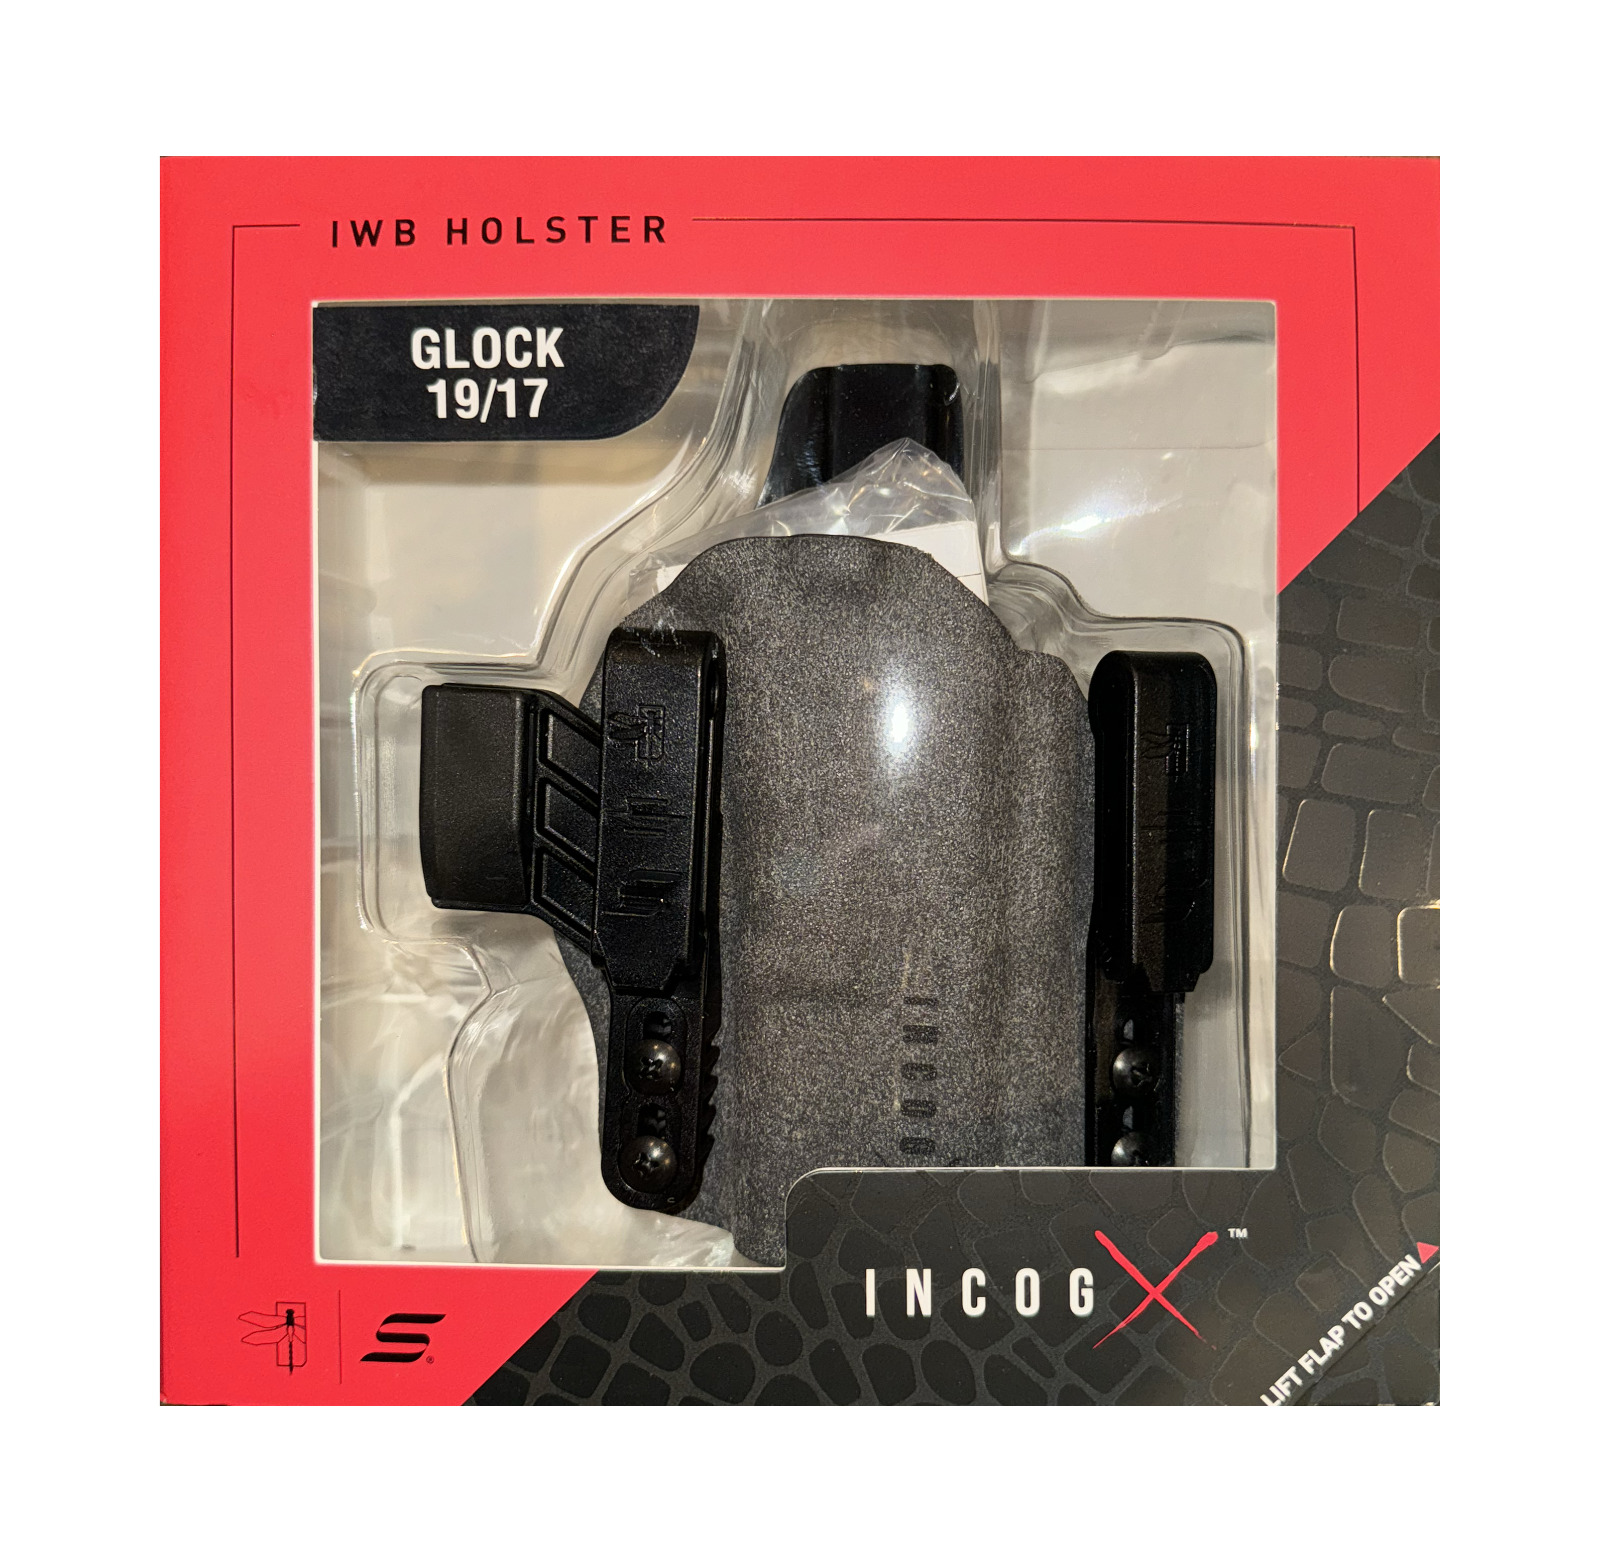 Safariland INCOG-X IWB Holster For Glock 17/19 Right Hand  1334624